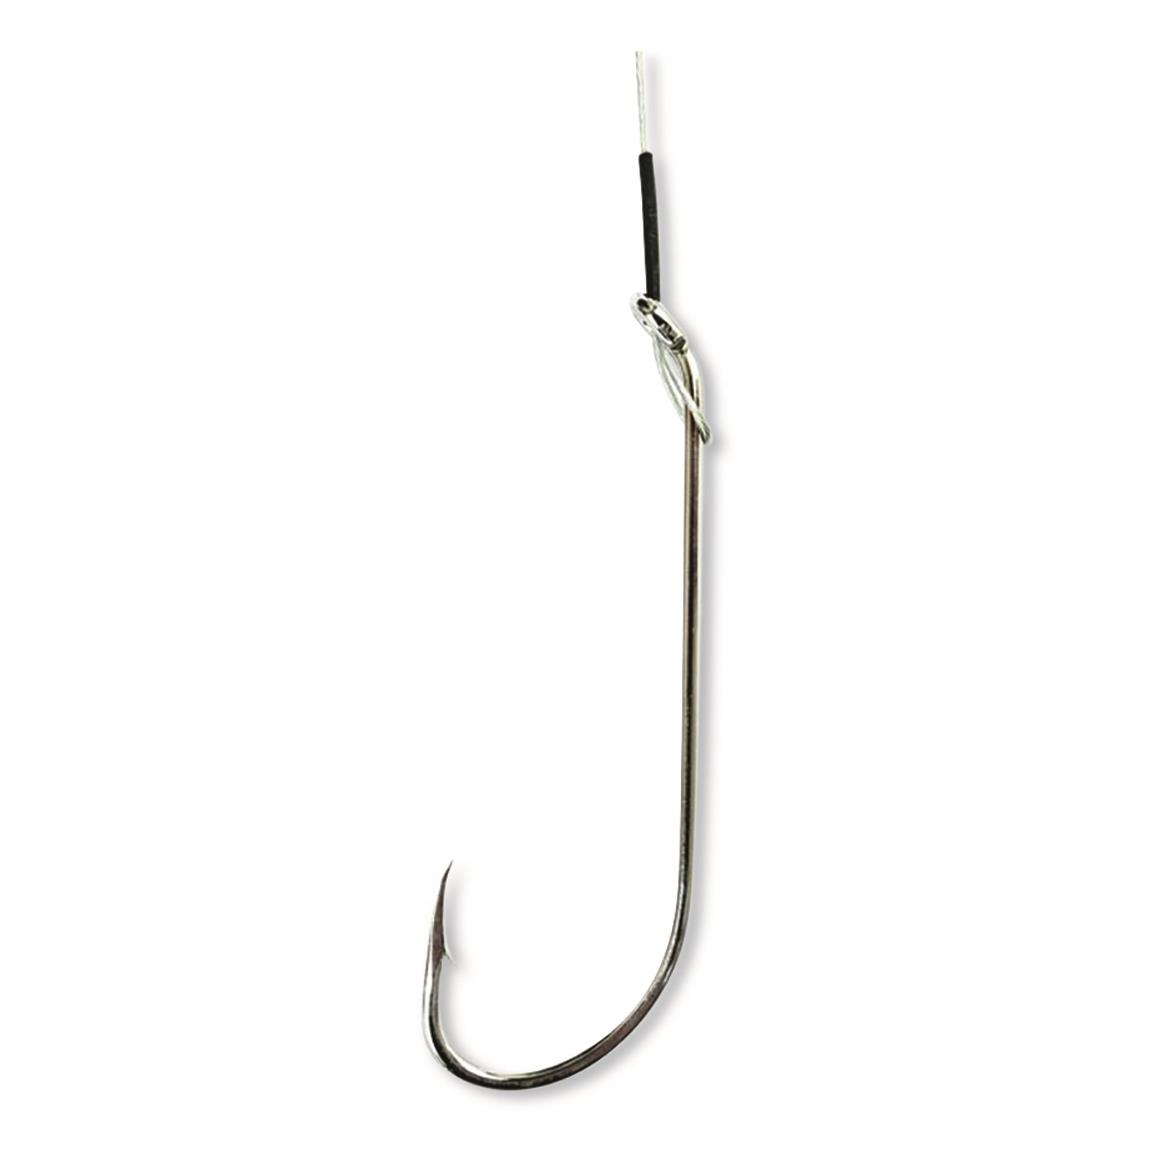 Eagle Claw Nylawire Snelled Hook, 18 Pack